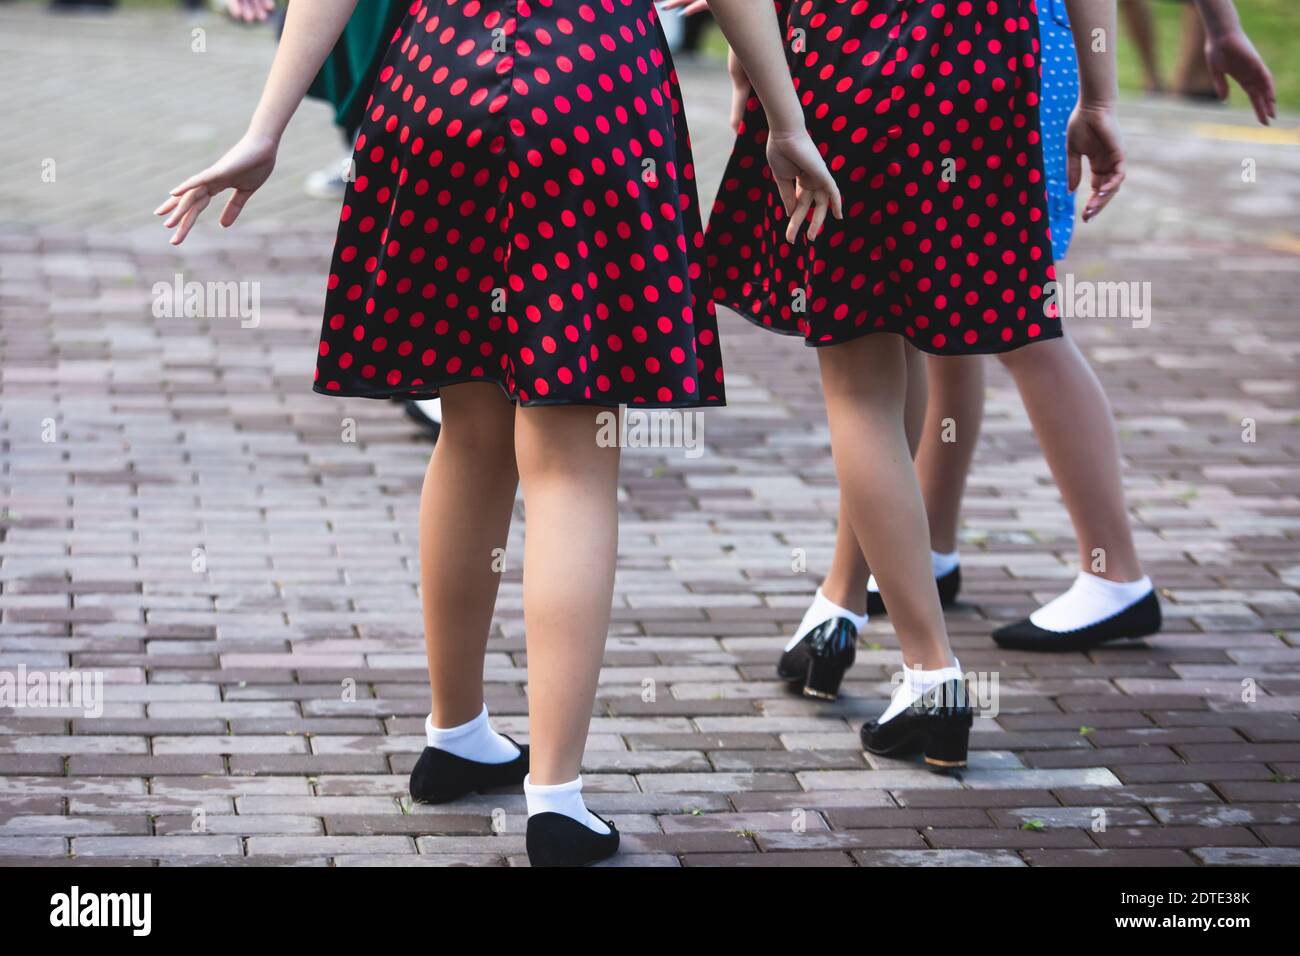 Young women wearing vintage polka dot dresses dancing in city park ...